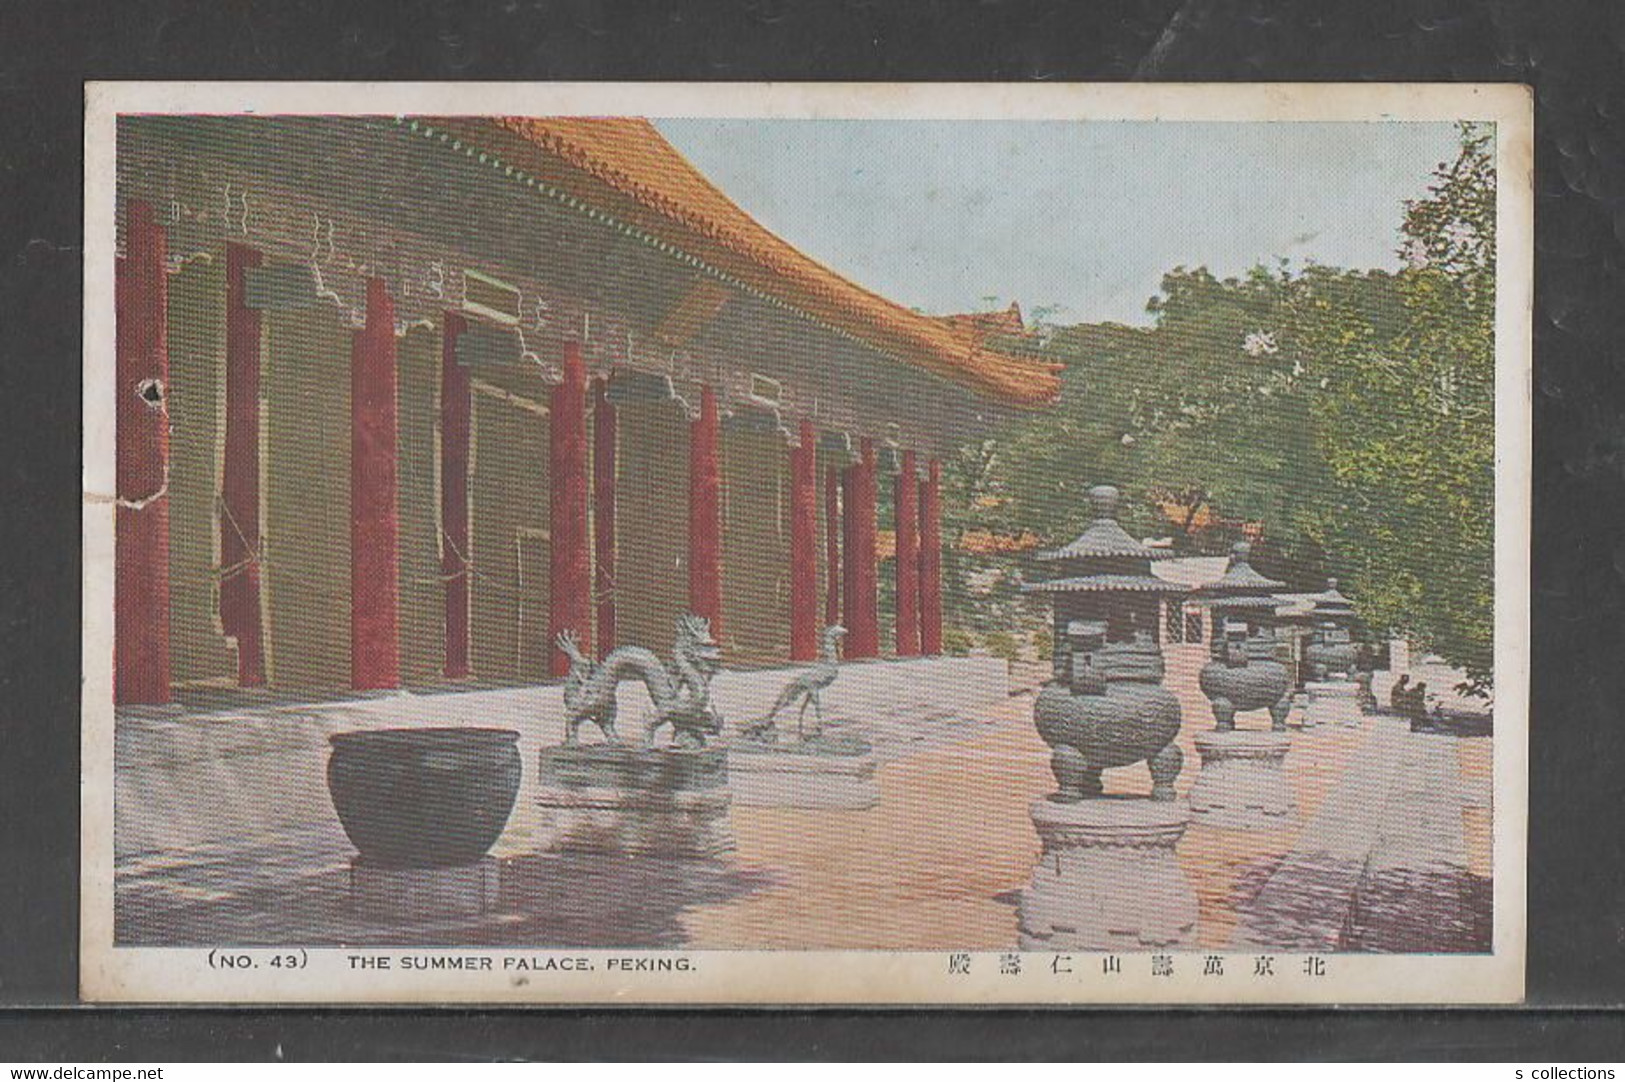 JAPAN WWII Military PEKING Beijing Picture Postcard NORTH CHINA WW2 MANCHURIA CHINE MANDCHOUKOUO JAPON GIAPPONE - 1941-45 Cina Del Nord